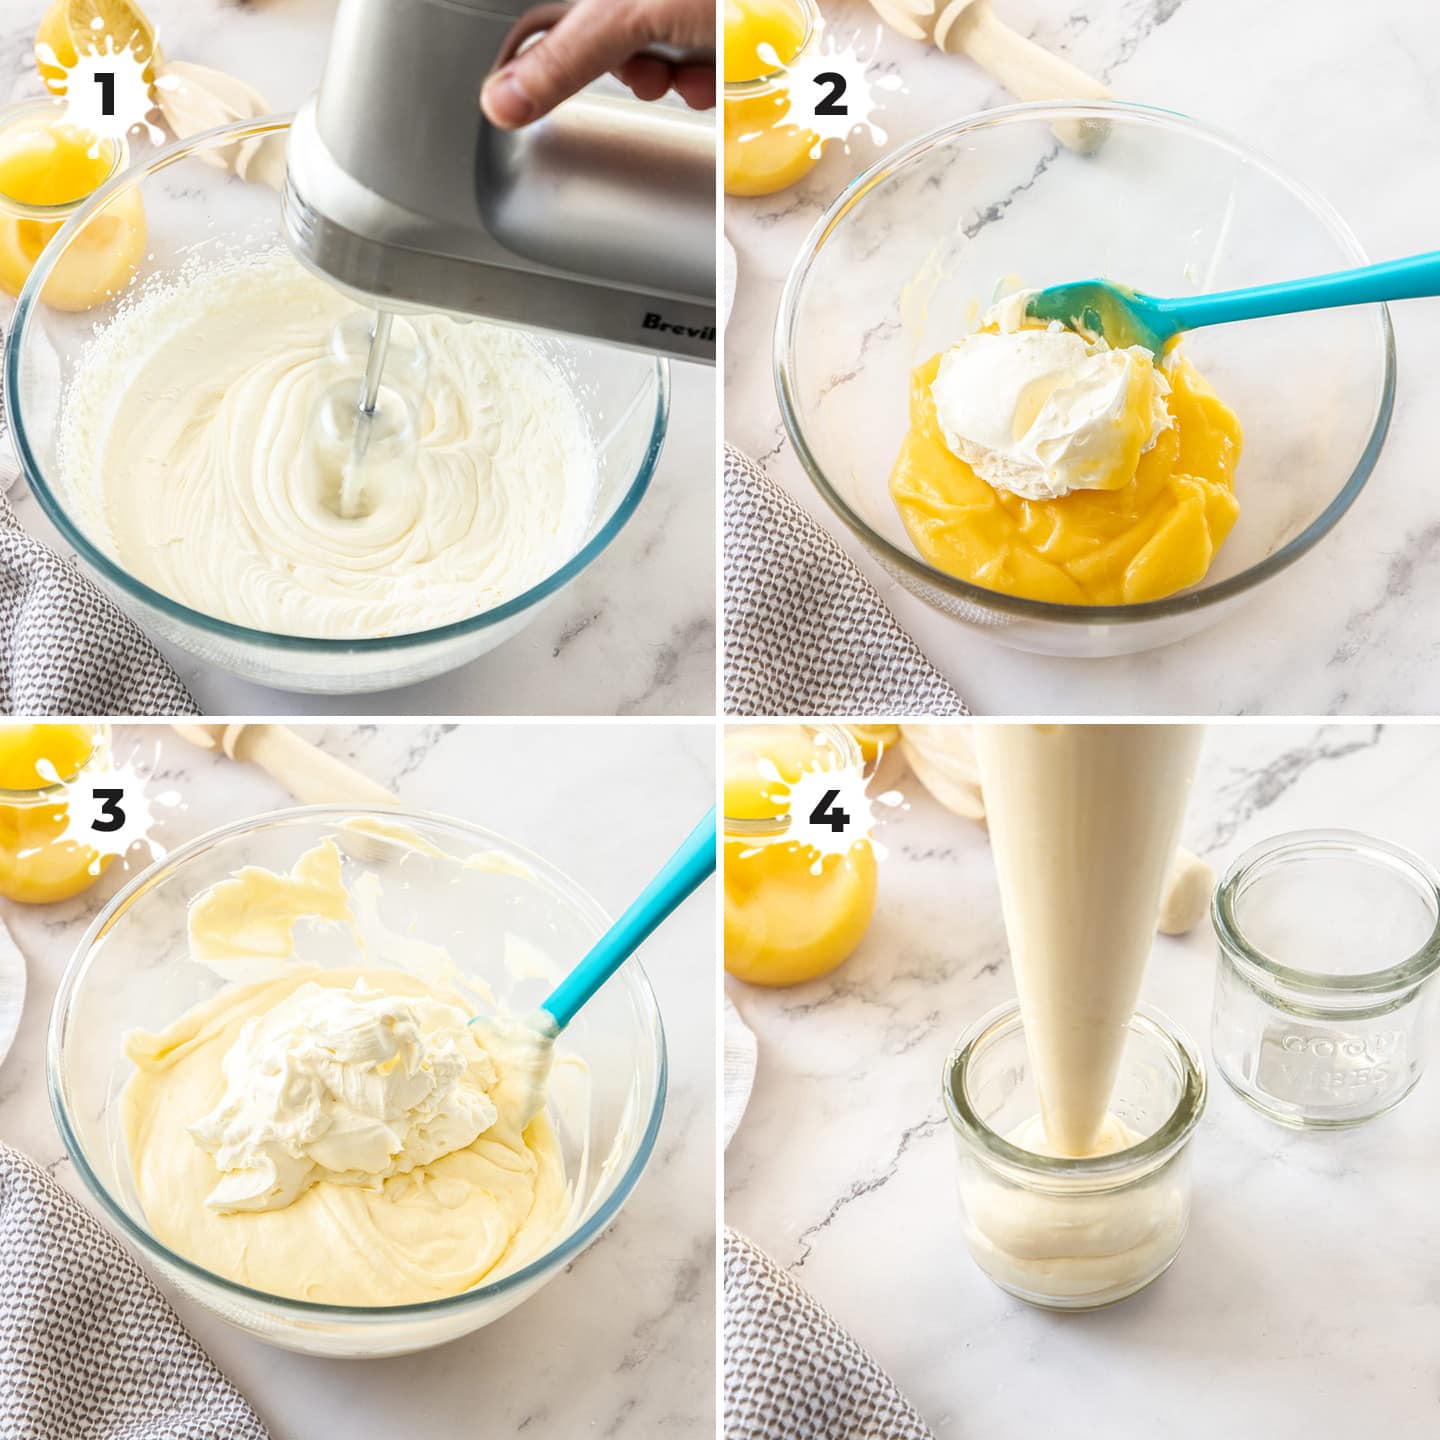 Photos showing how to make lemon curd mousse